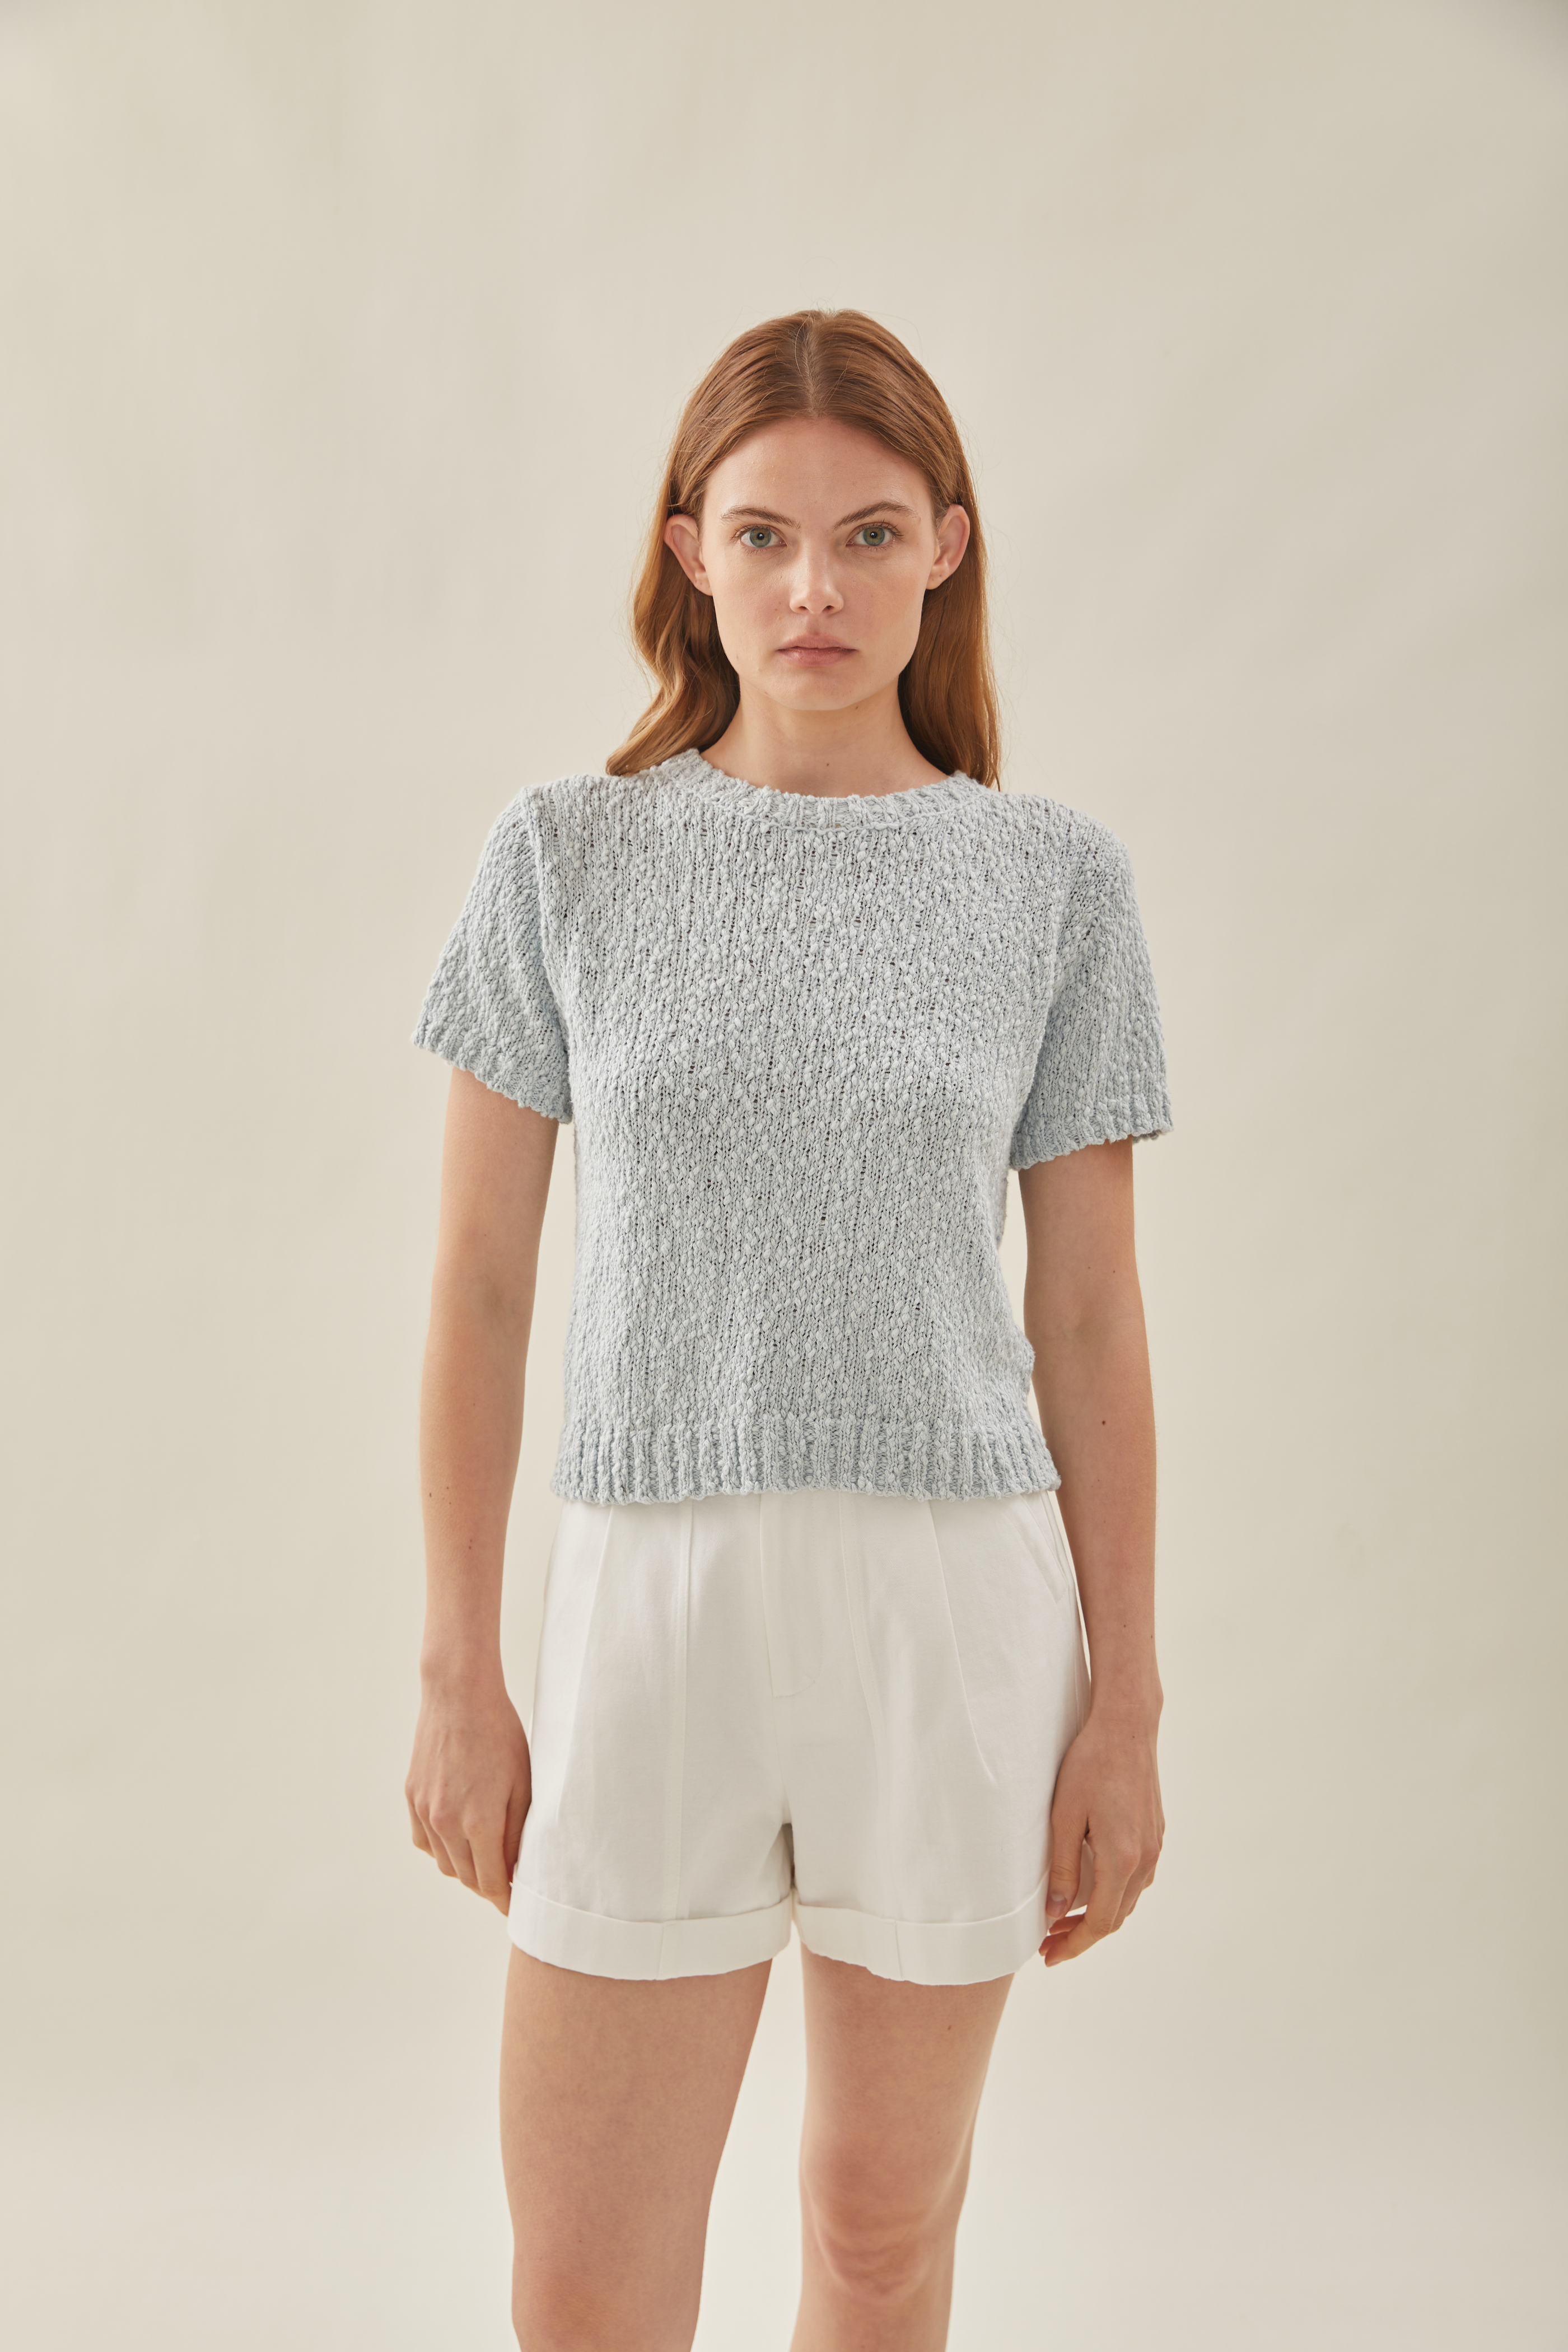 Textured Knit Top in Skylight